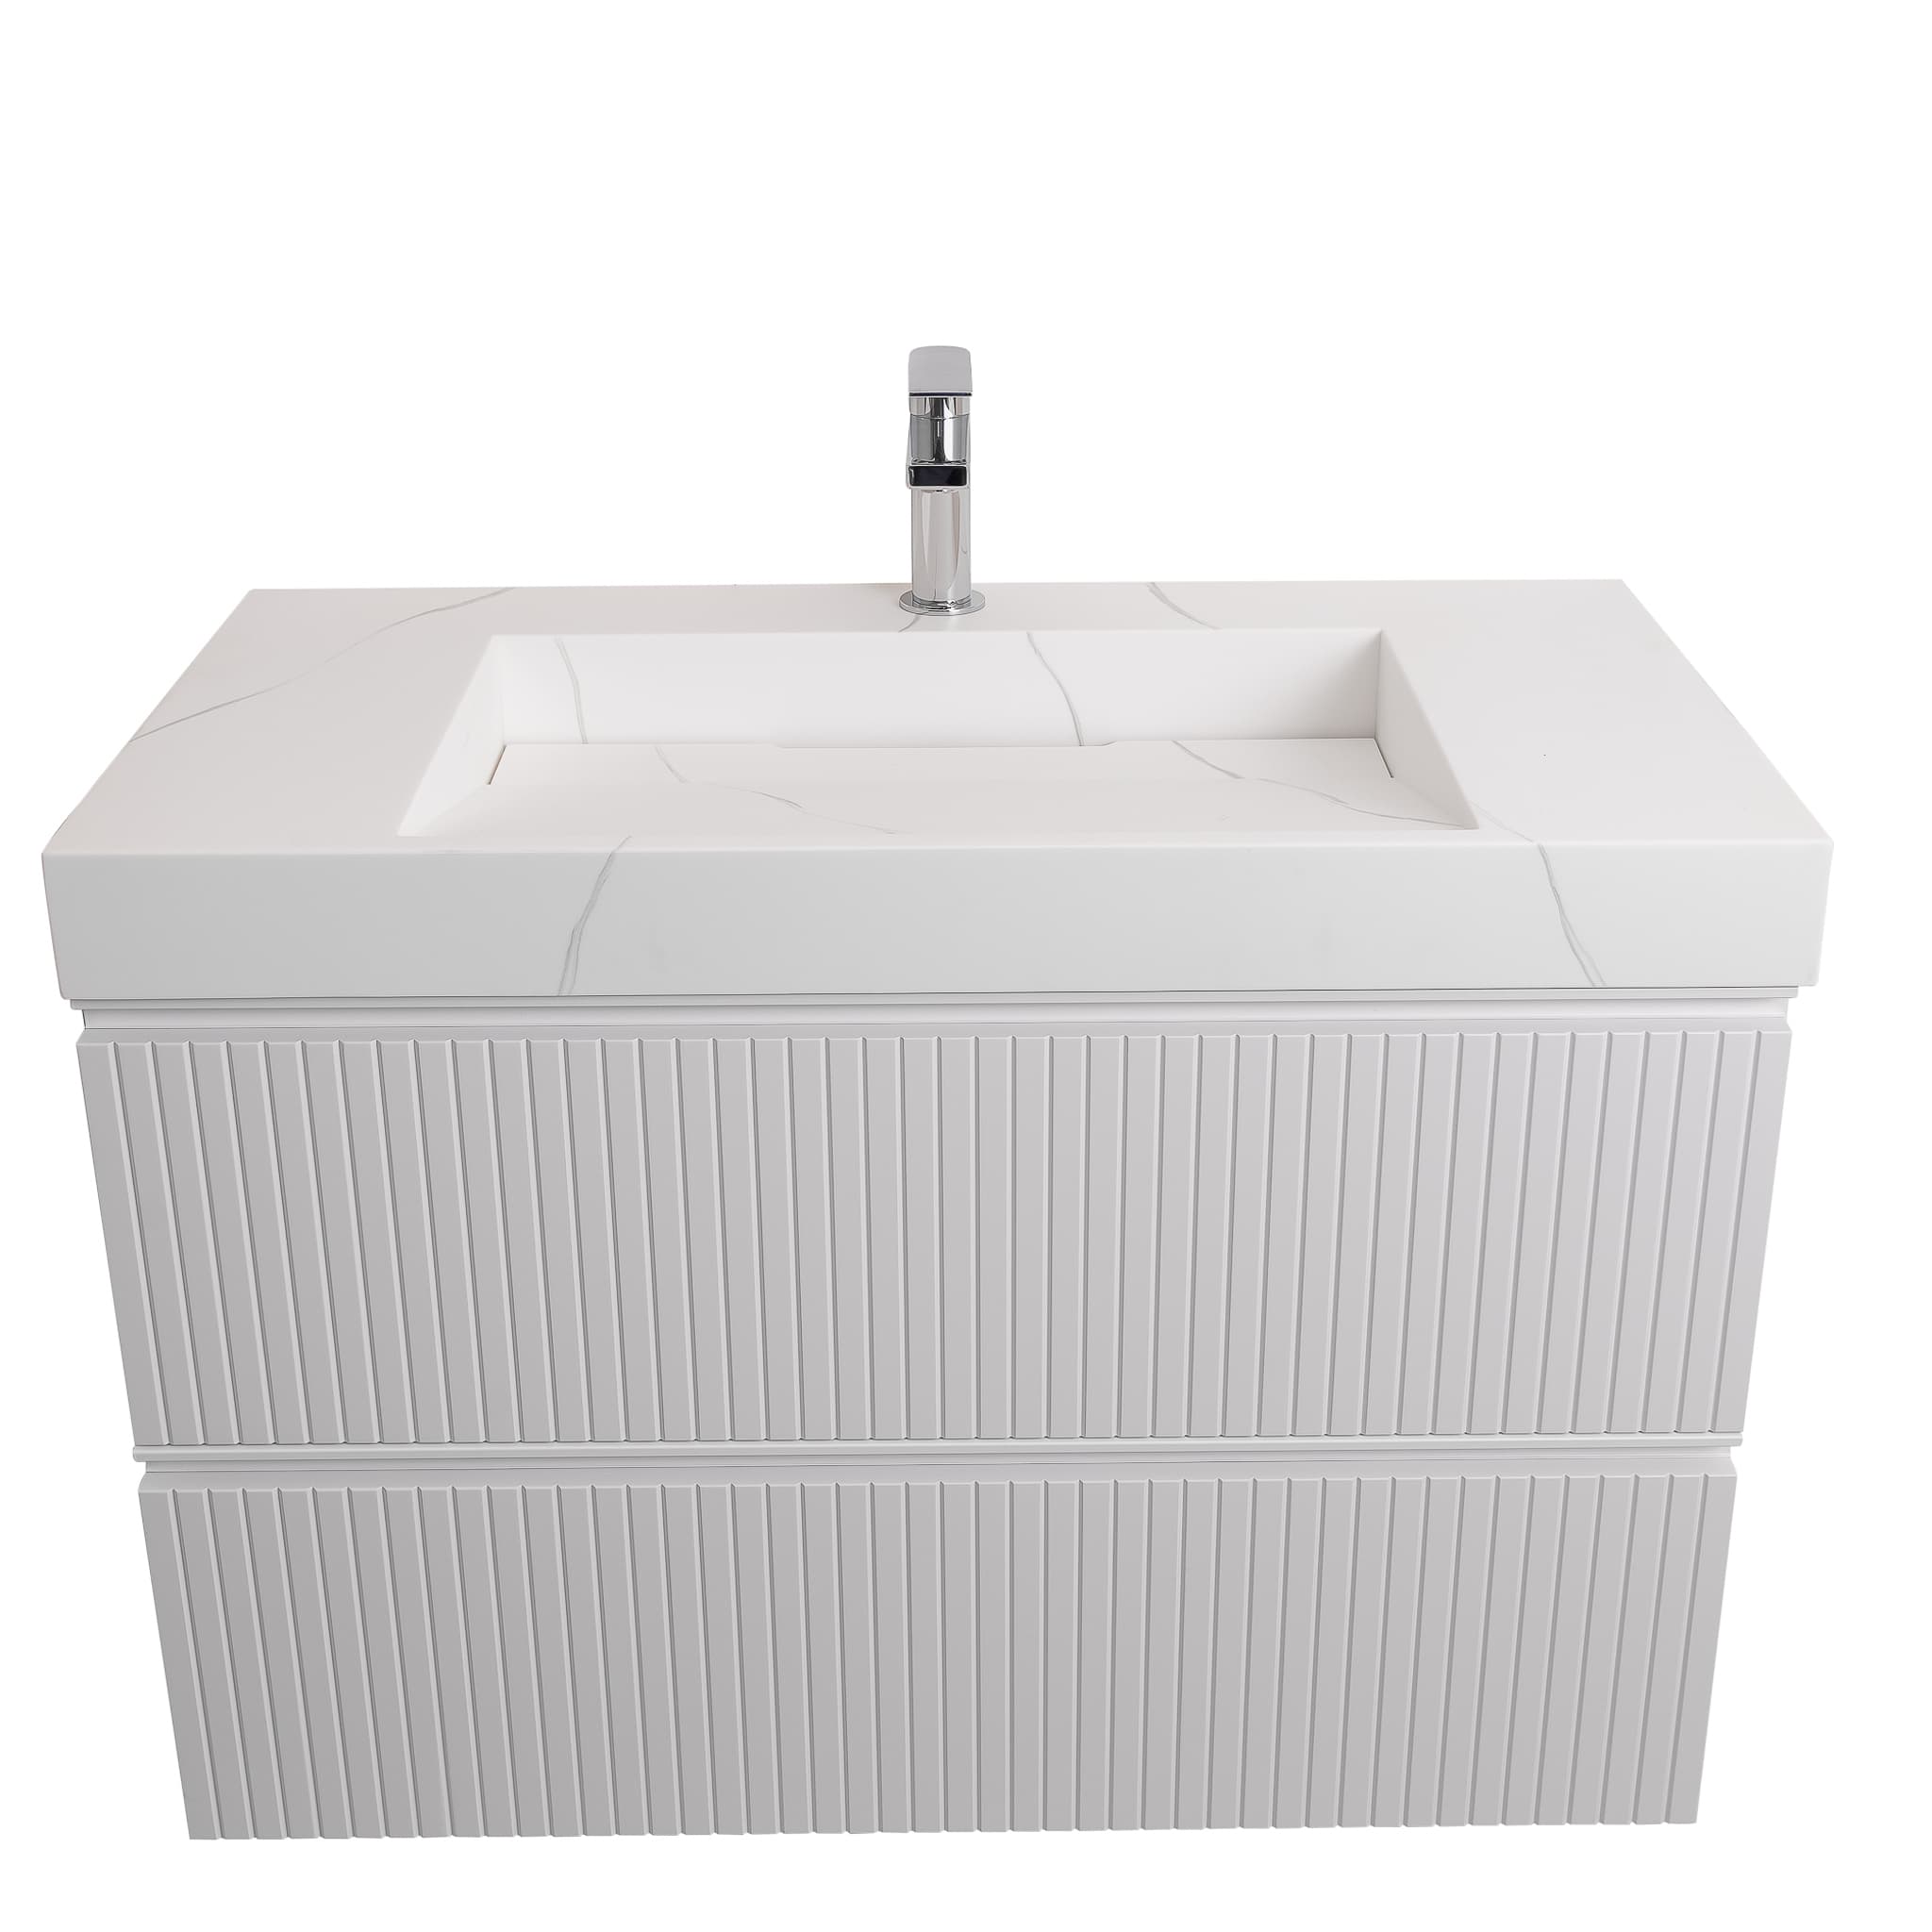 Ares 35.5 Matte White Cabinet, Solid Surface Matte White Top Carrara Infinity Sink, Wall Mounted Modern Vanity Set